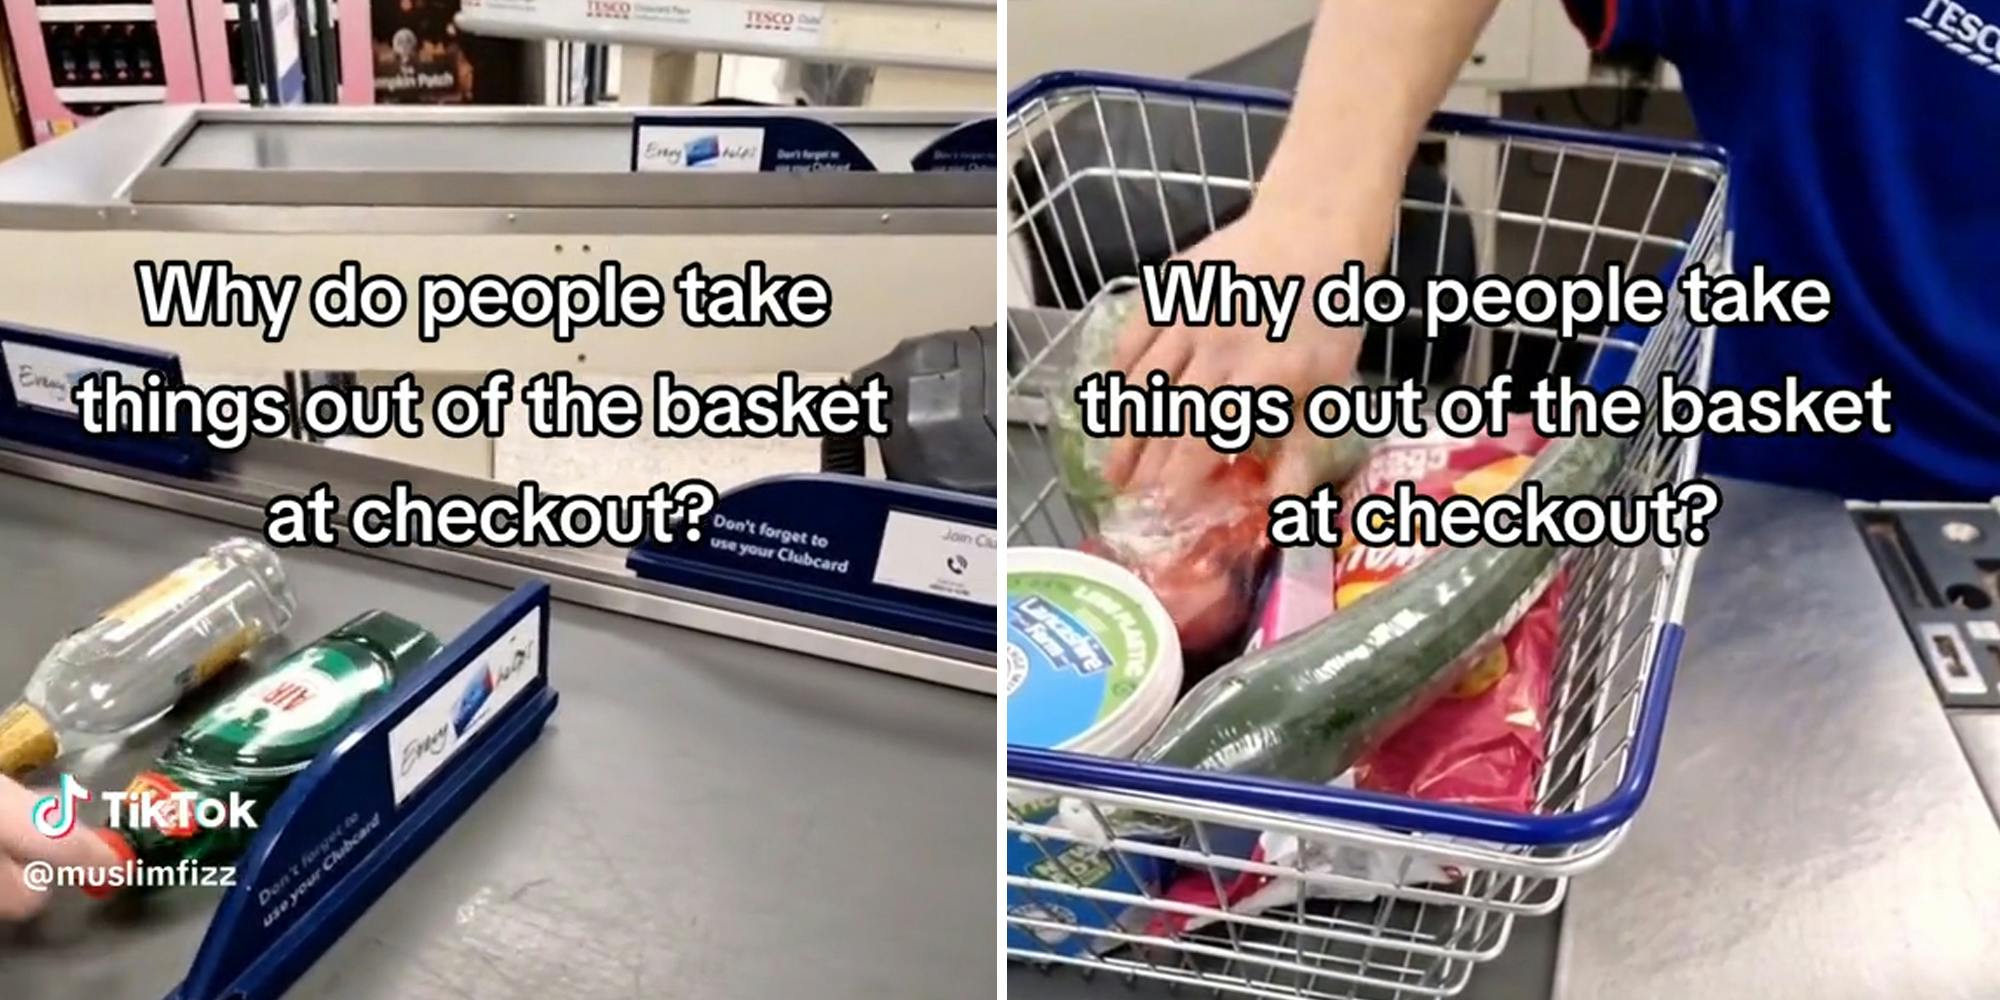 checkout lane with caption "why do people take things out of the basket at checkout?"